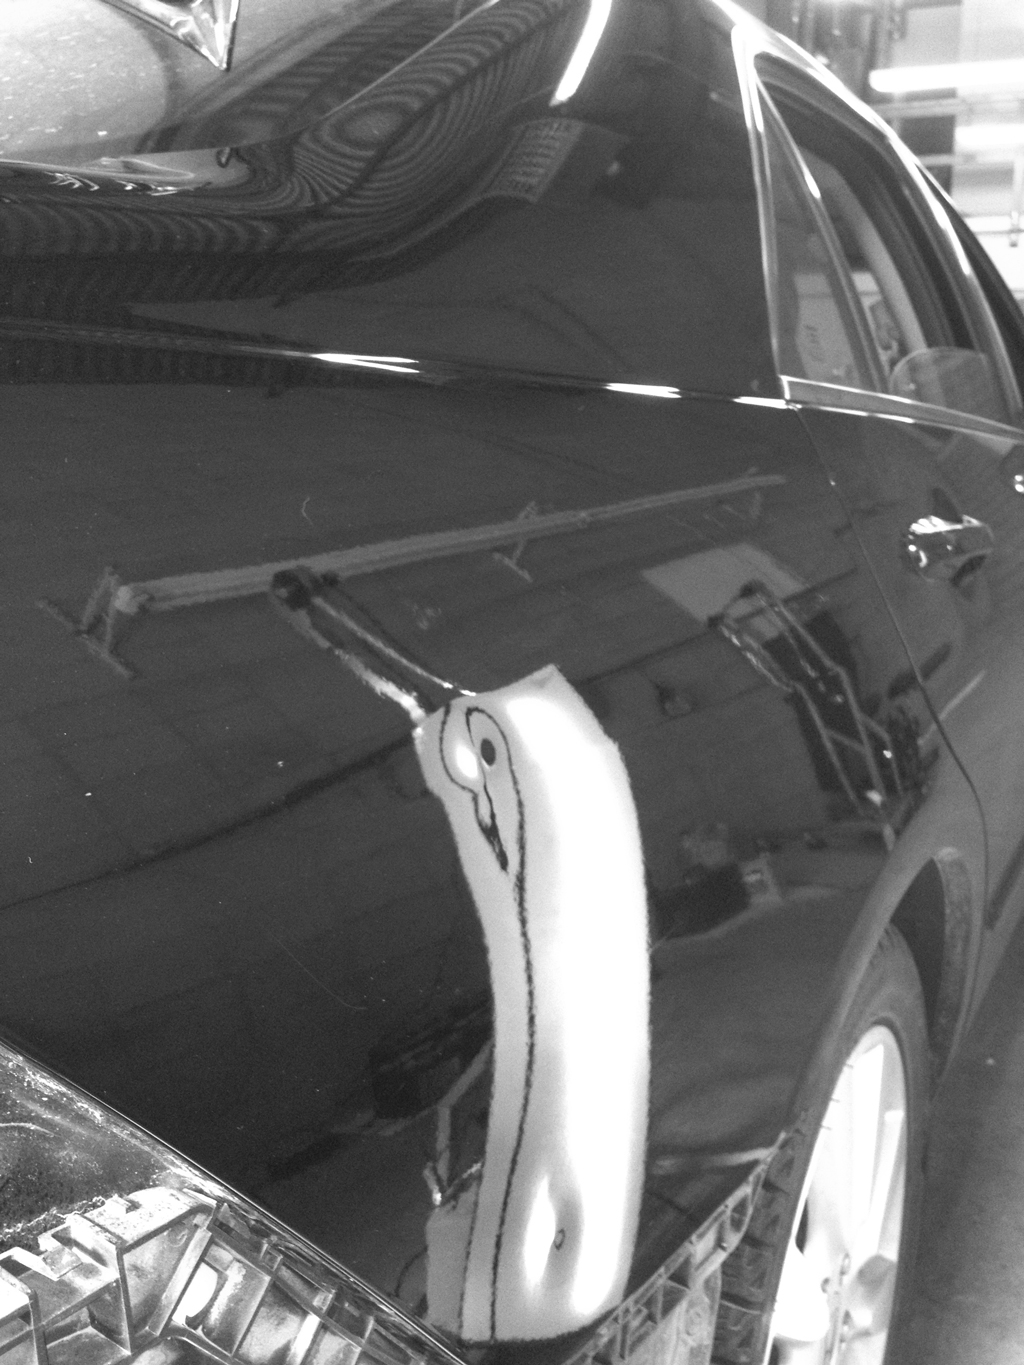 Before image of dent in rear quarter panel